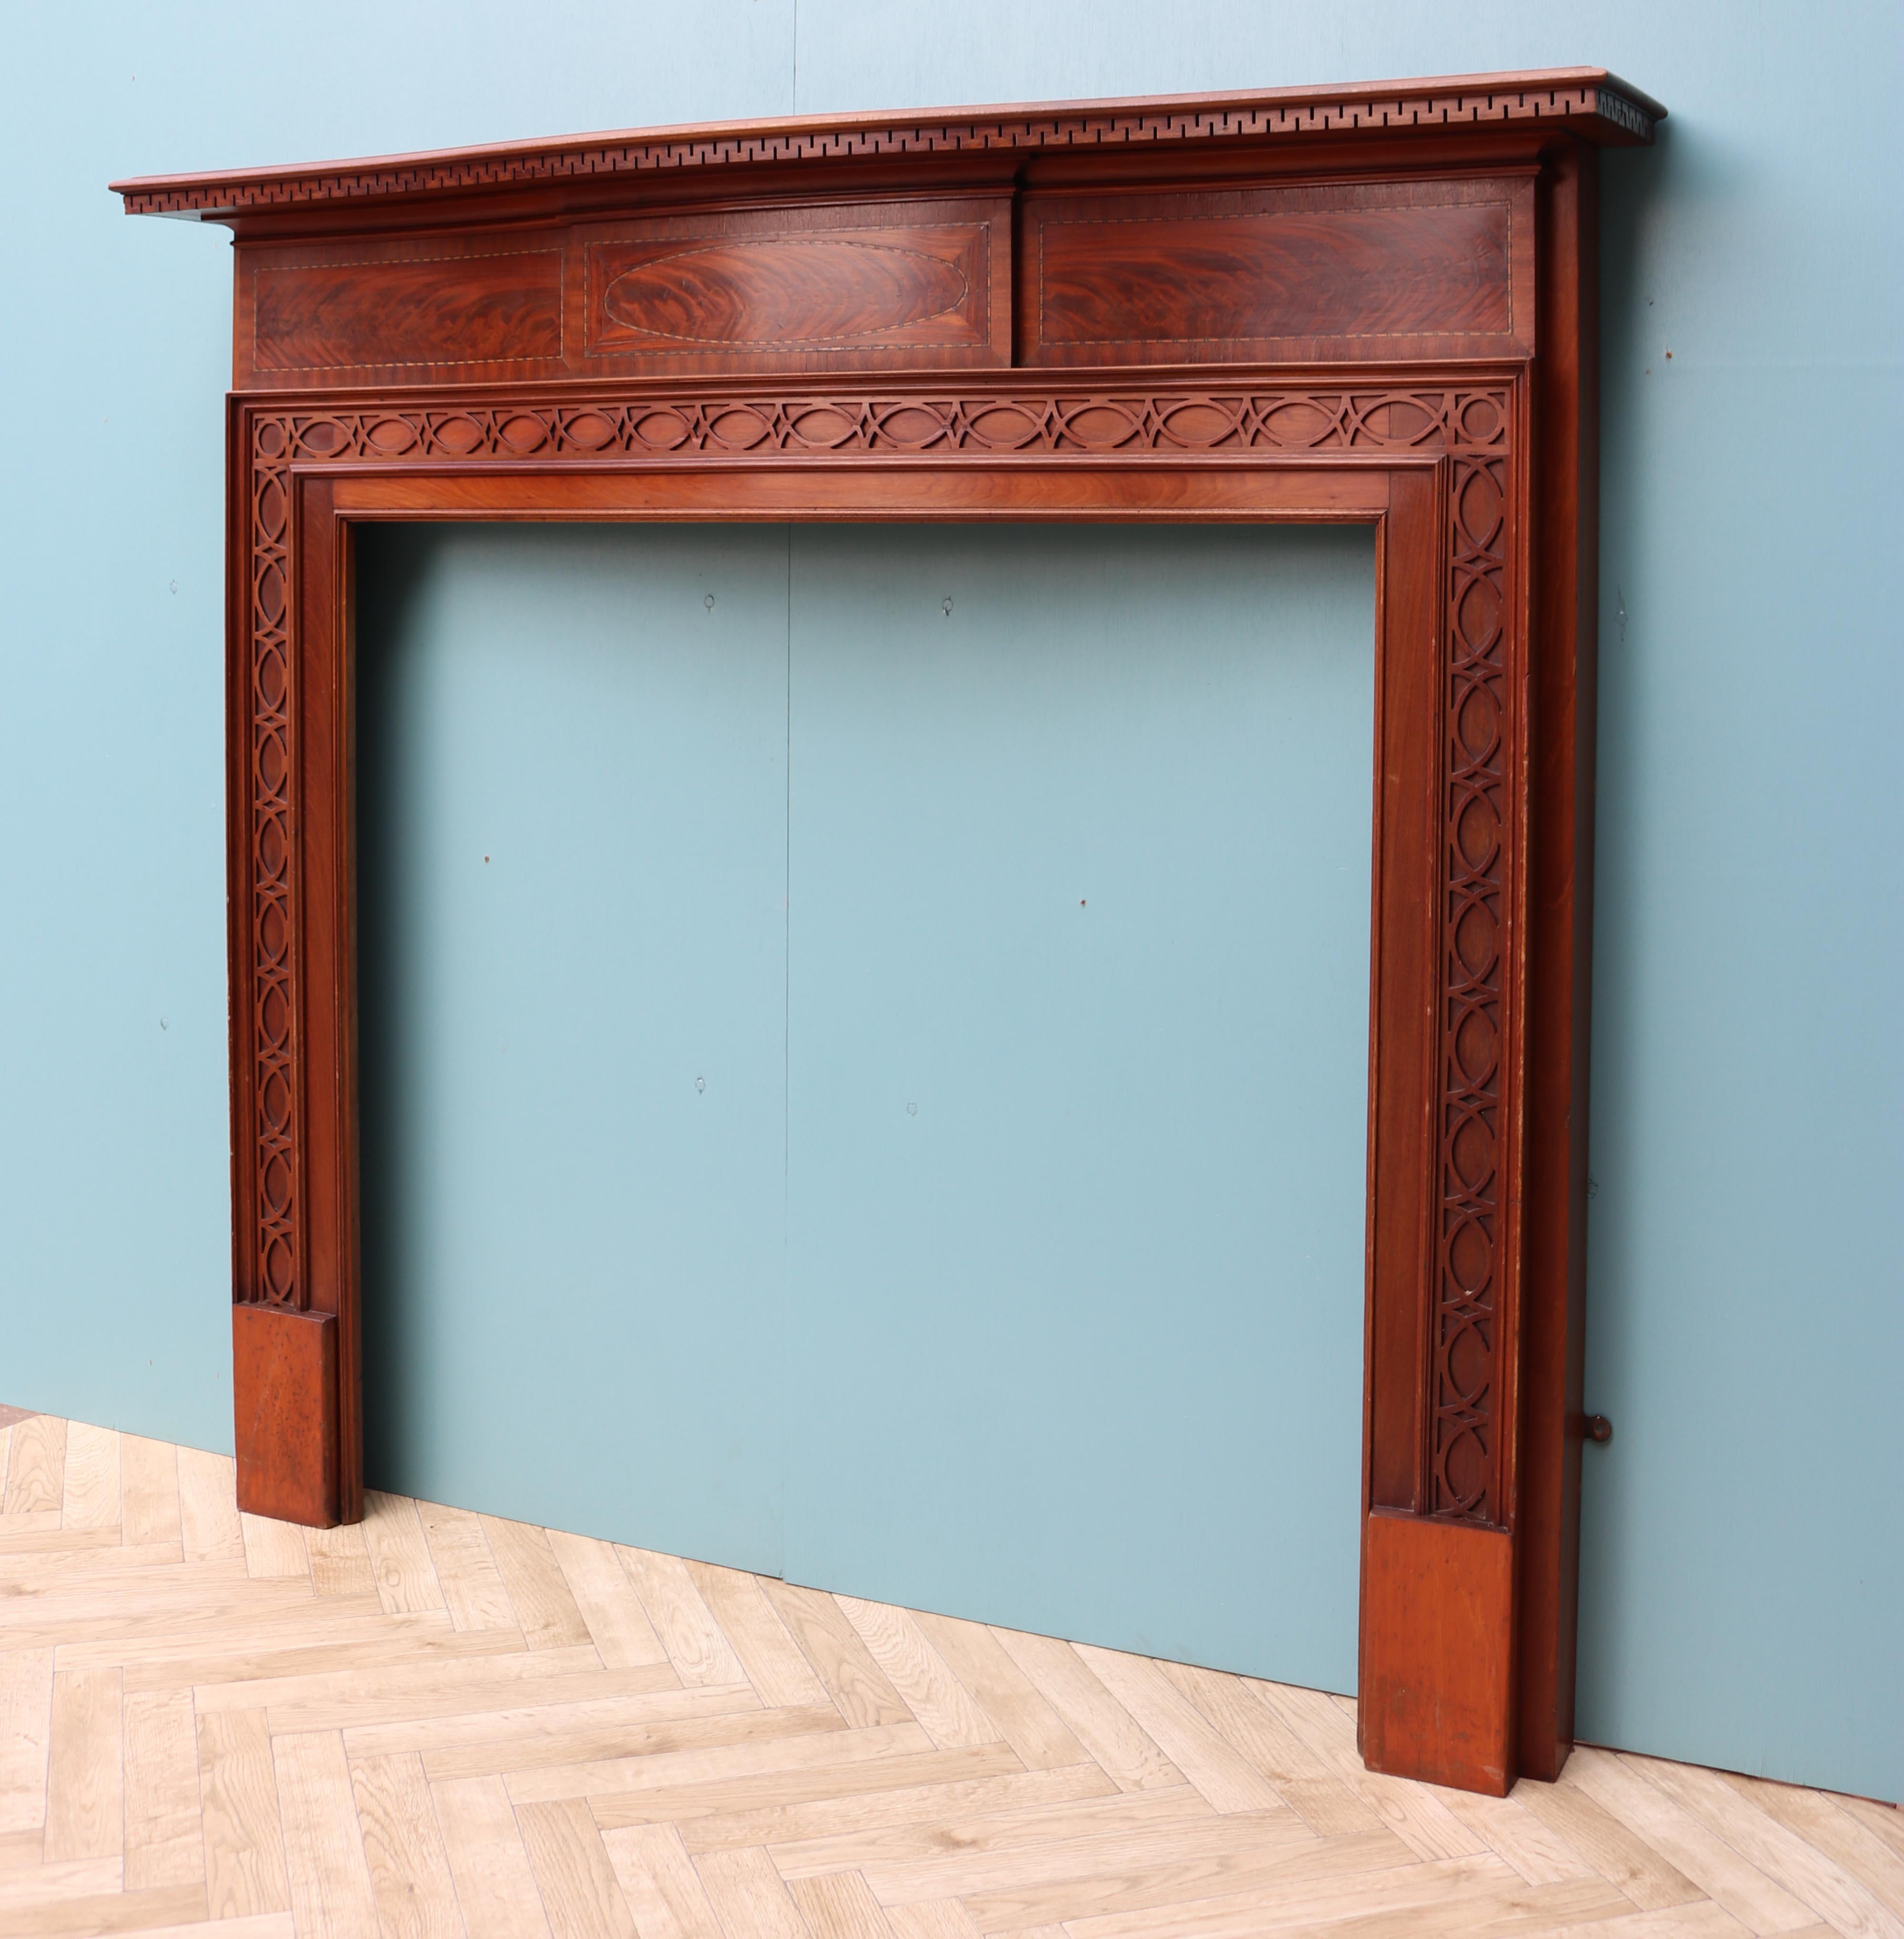 An early 20th century inlaid bow fronted flame Mahogany fire surround with fretwork panels in the Chippendale style.

Additional Dimensions:

Opening Height 102 cm

Opening Width 106.5 cm

Width between outside of legs 139 cm.